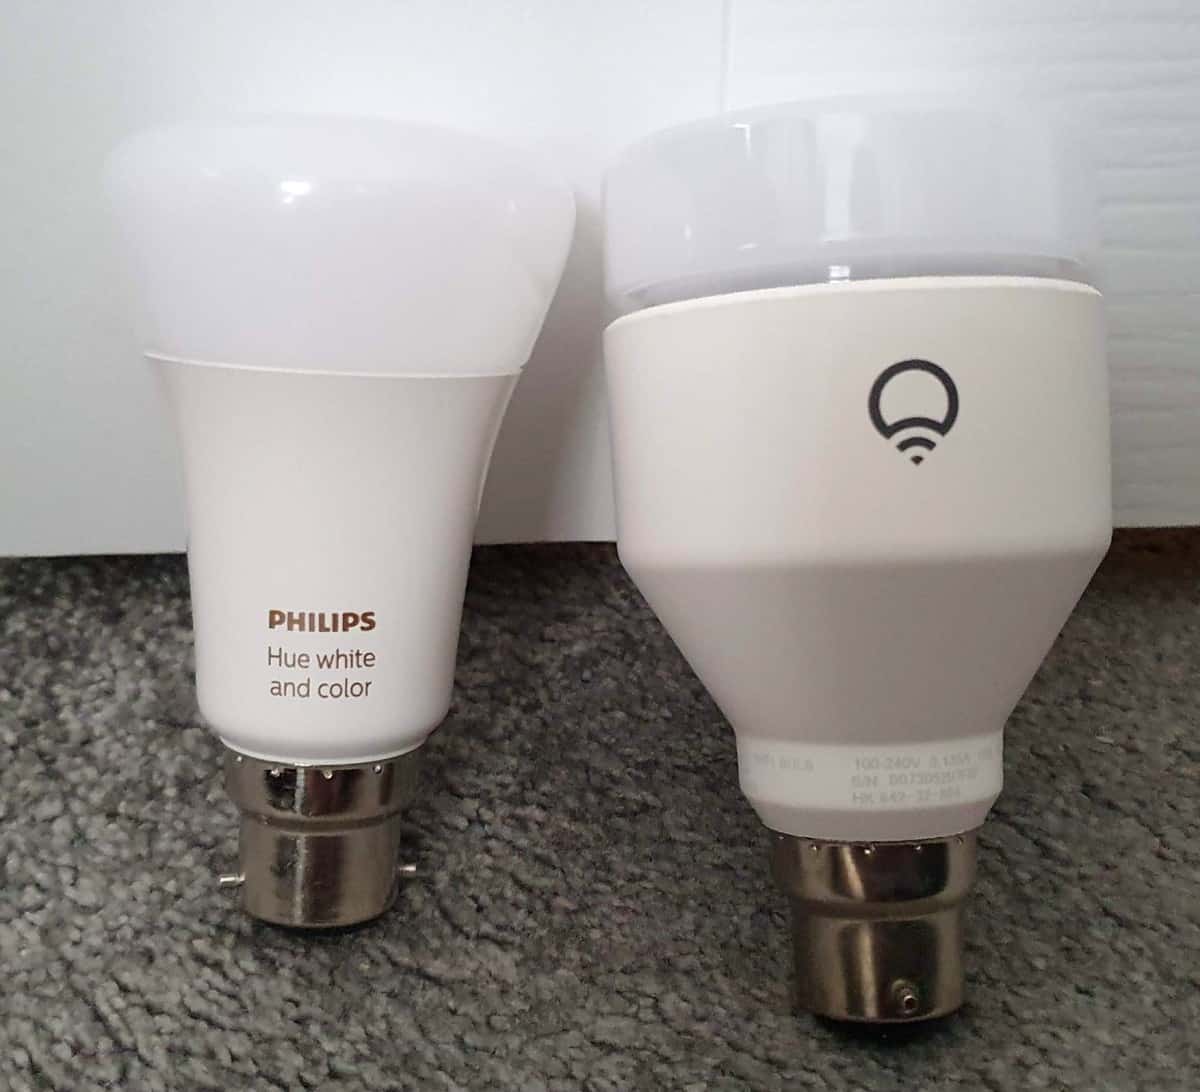 Can Philips Control Other Bulbs & Normal Lights)?